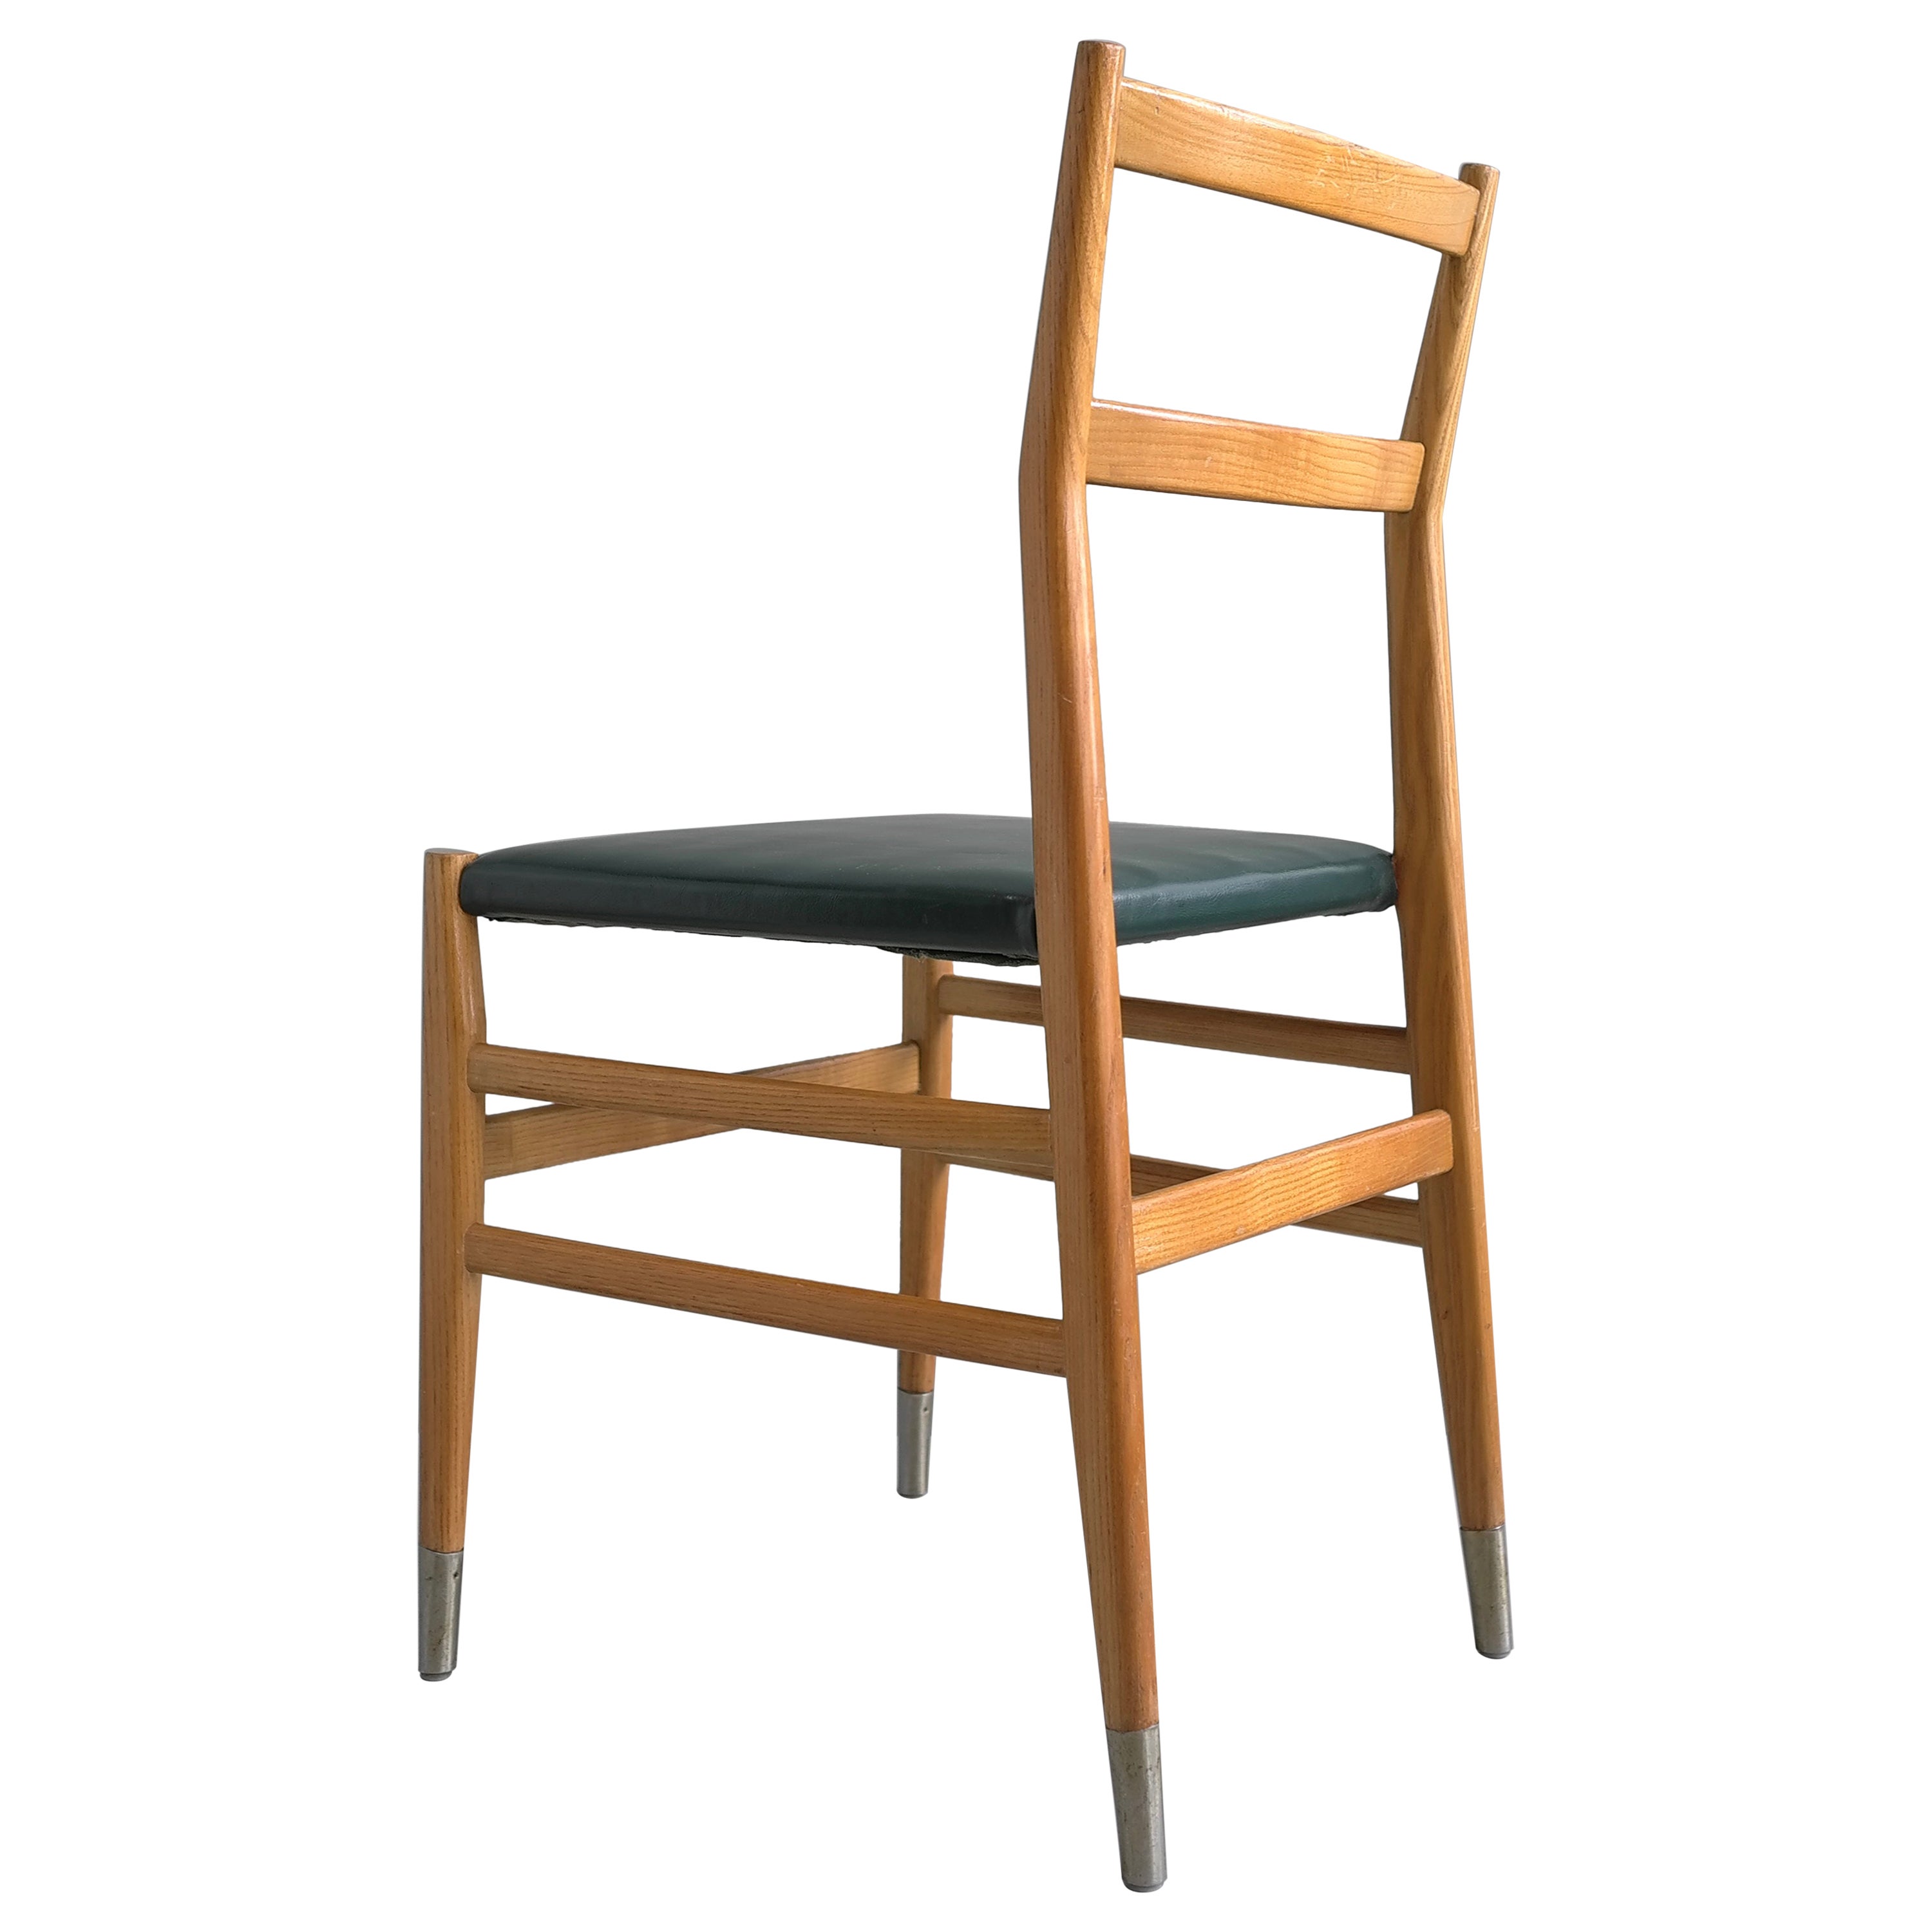 Gio Ponti "The Piazza Eindhoven, 1968" Rare Edition Chair with Metal End Caps For Sale